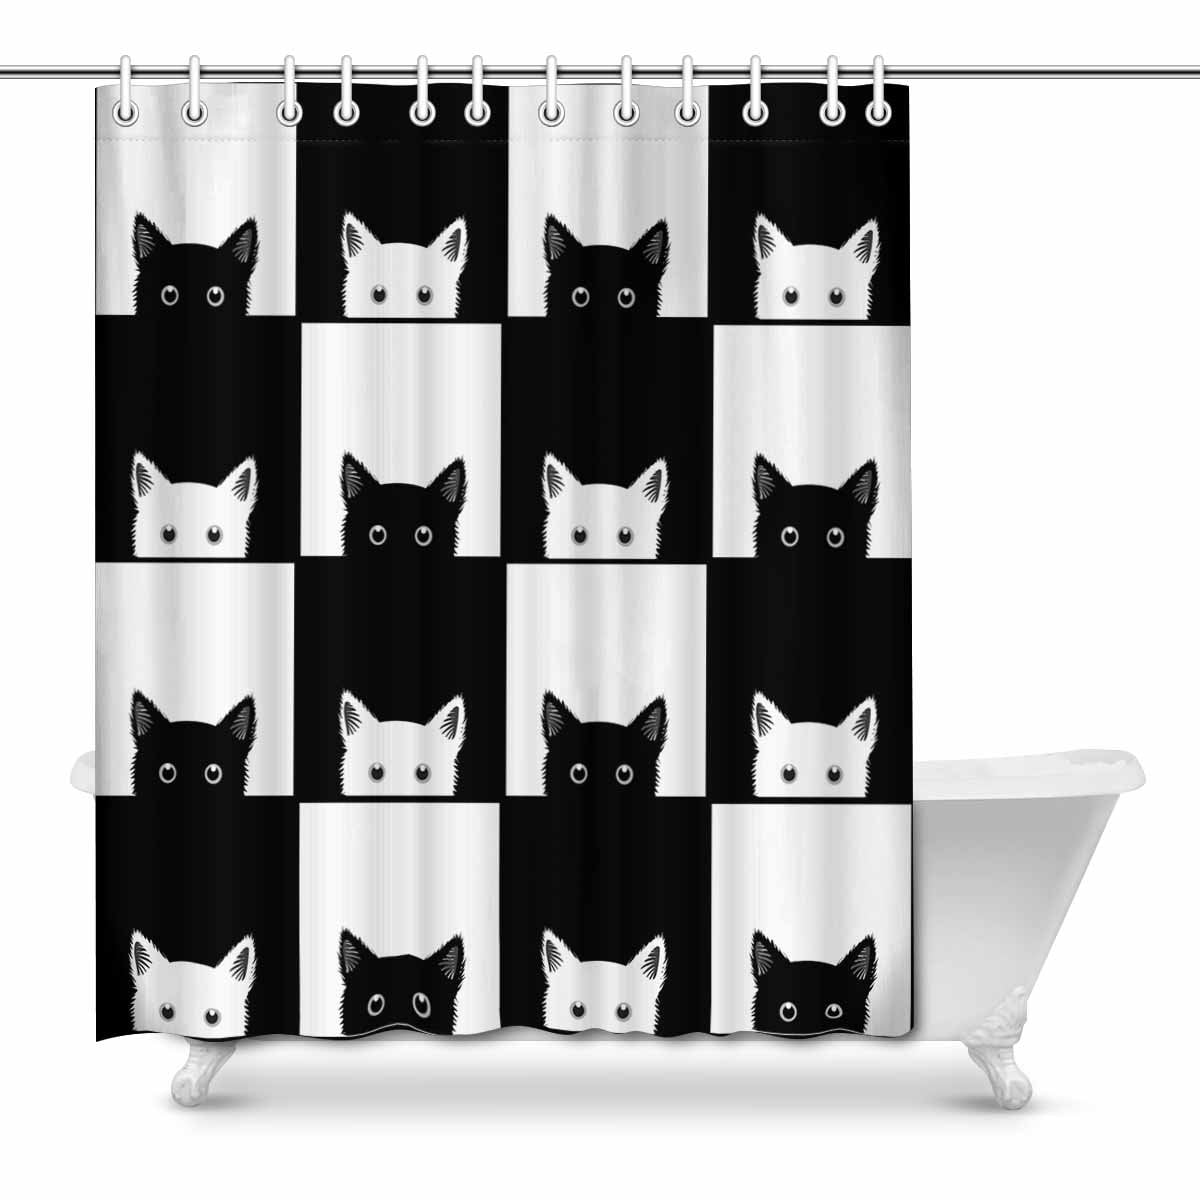 Bathroom Shower Curtain 66x72 Inch, Country Cat Shower Curtain